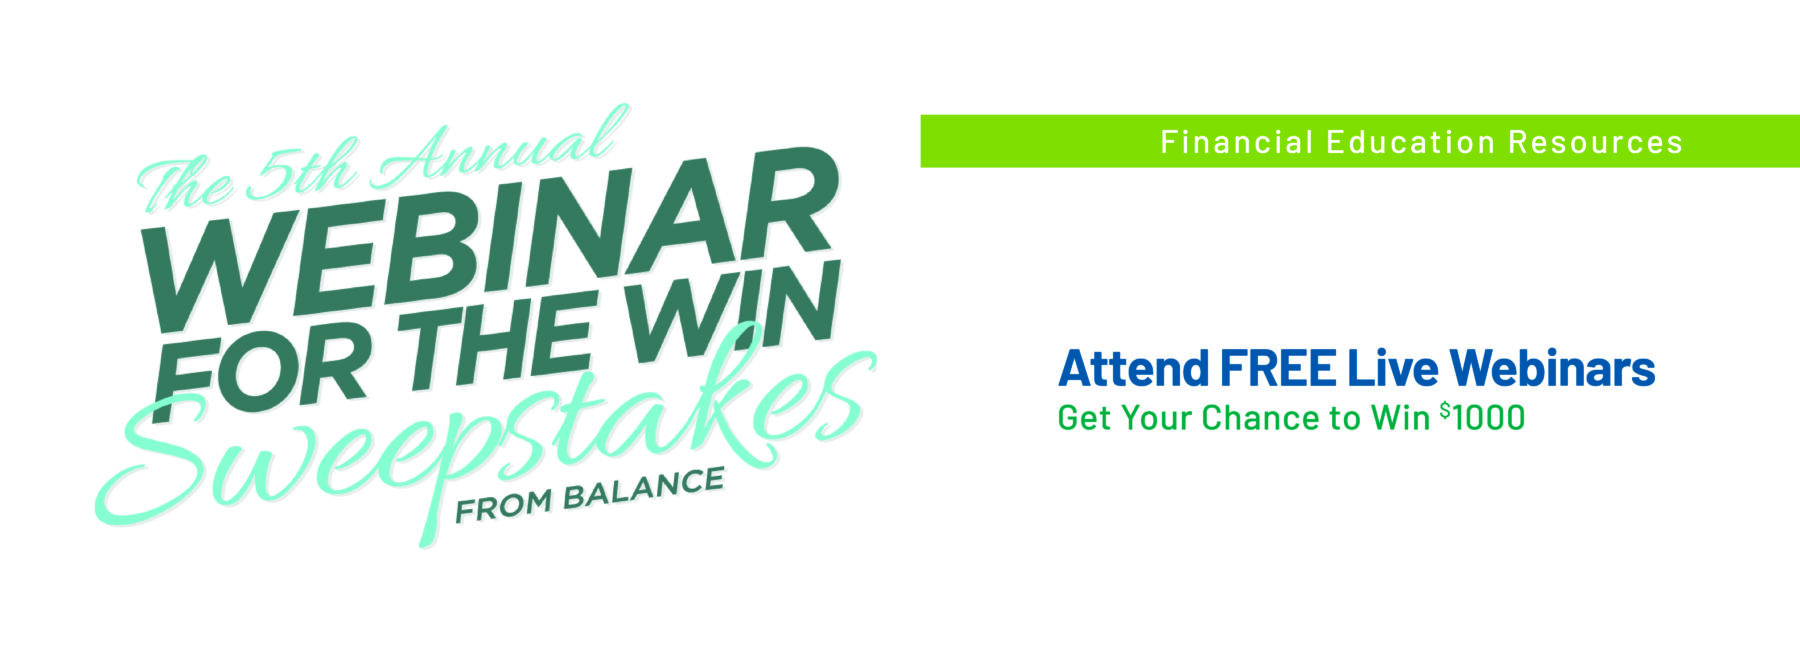 webinar for the win sweepstakes from balance text